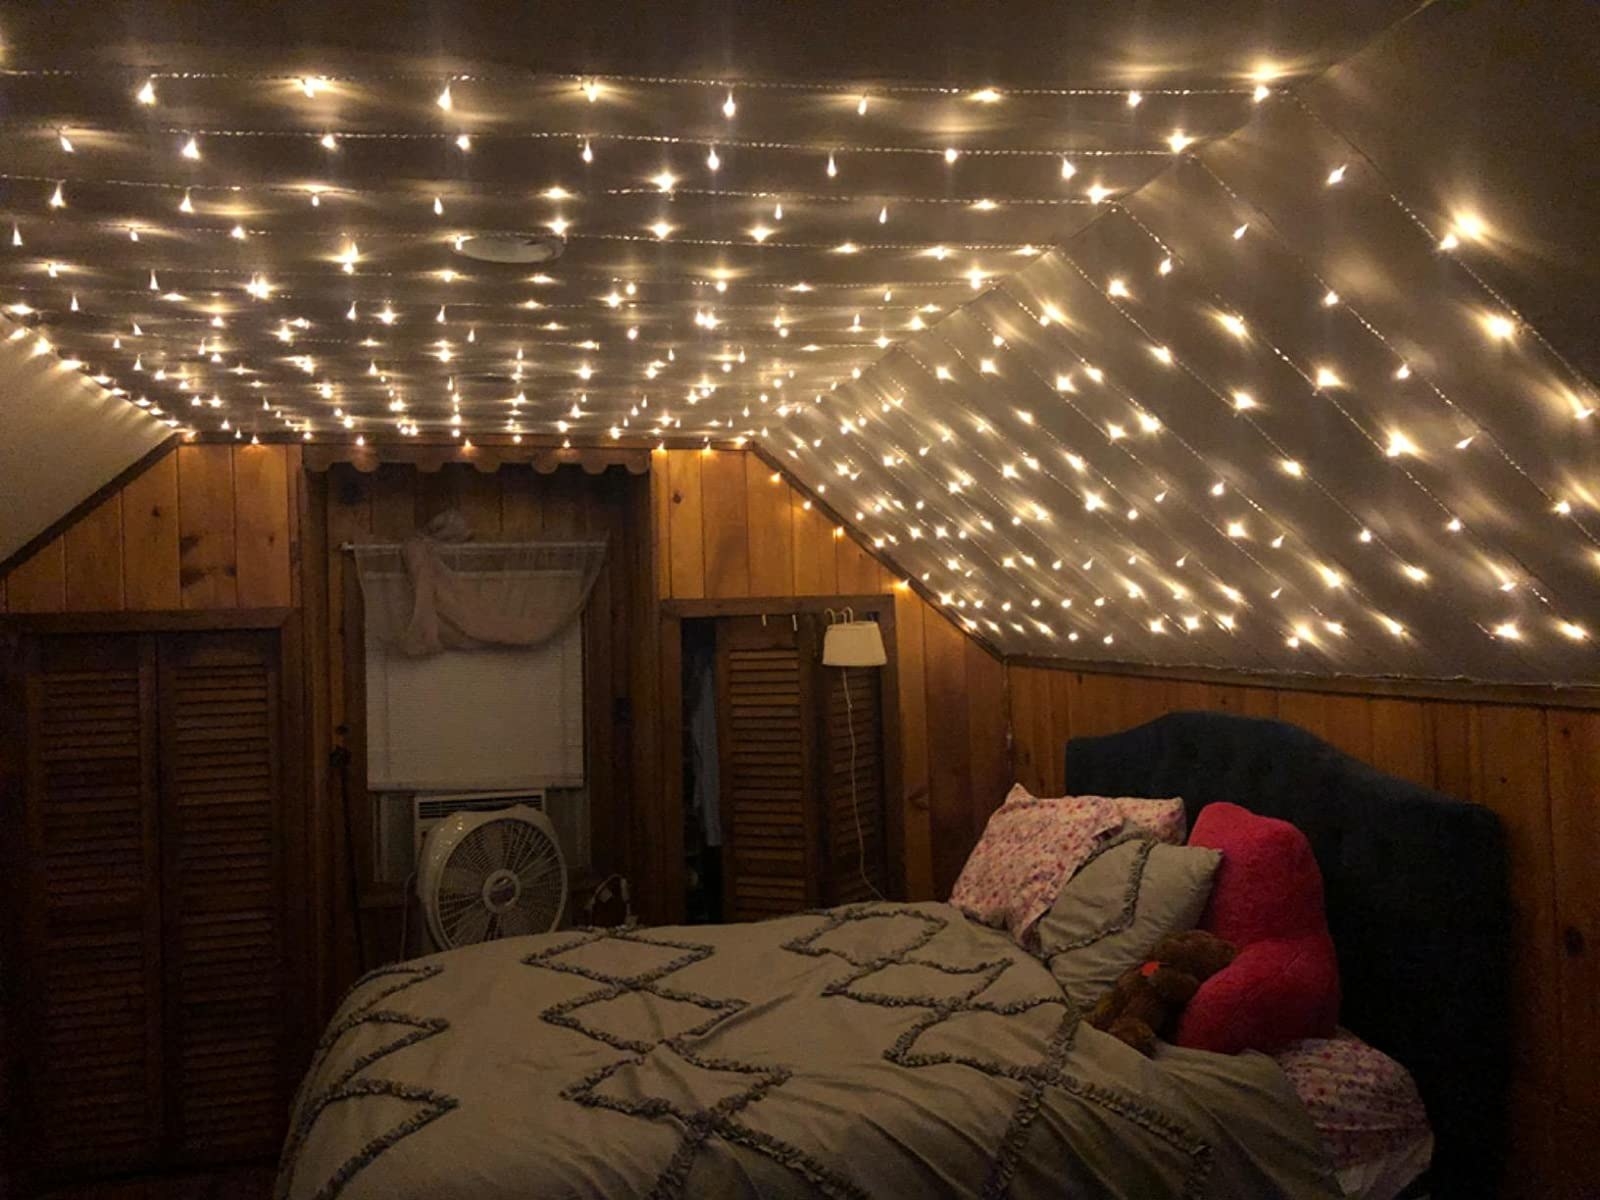 Image of bright fairy lights filling a bedroom.